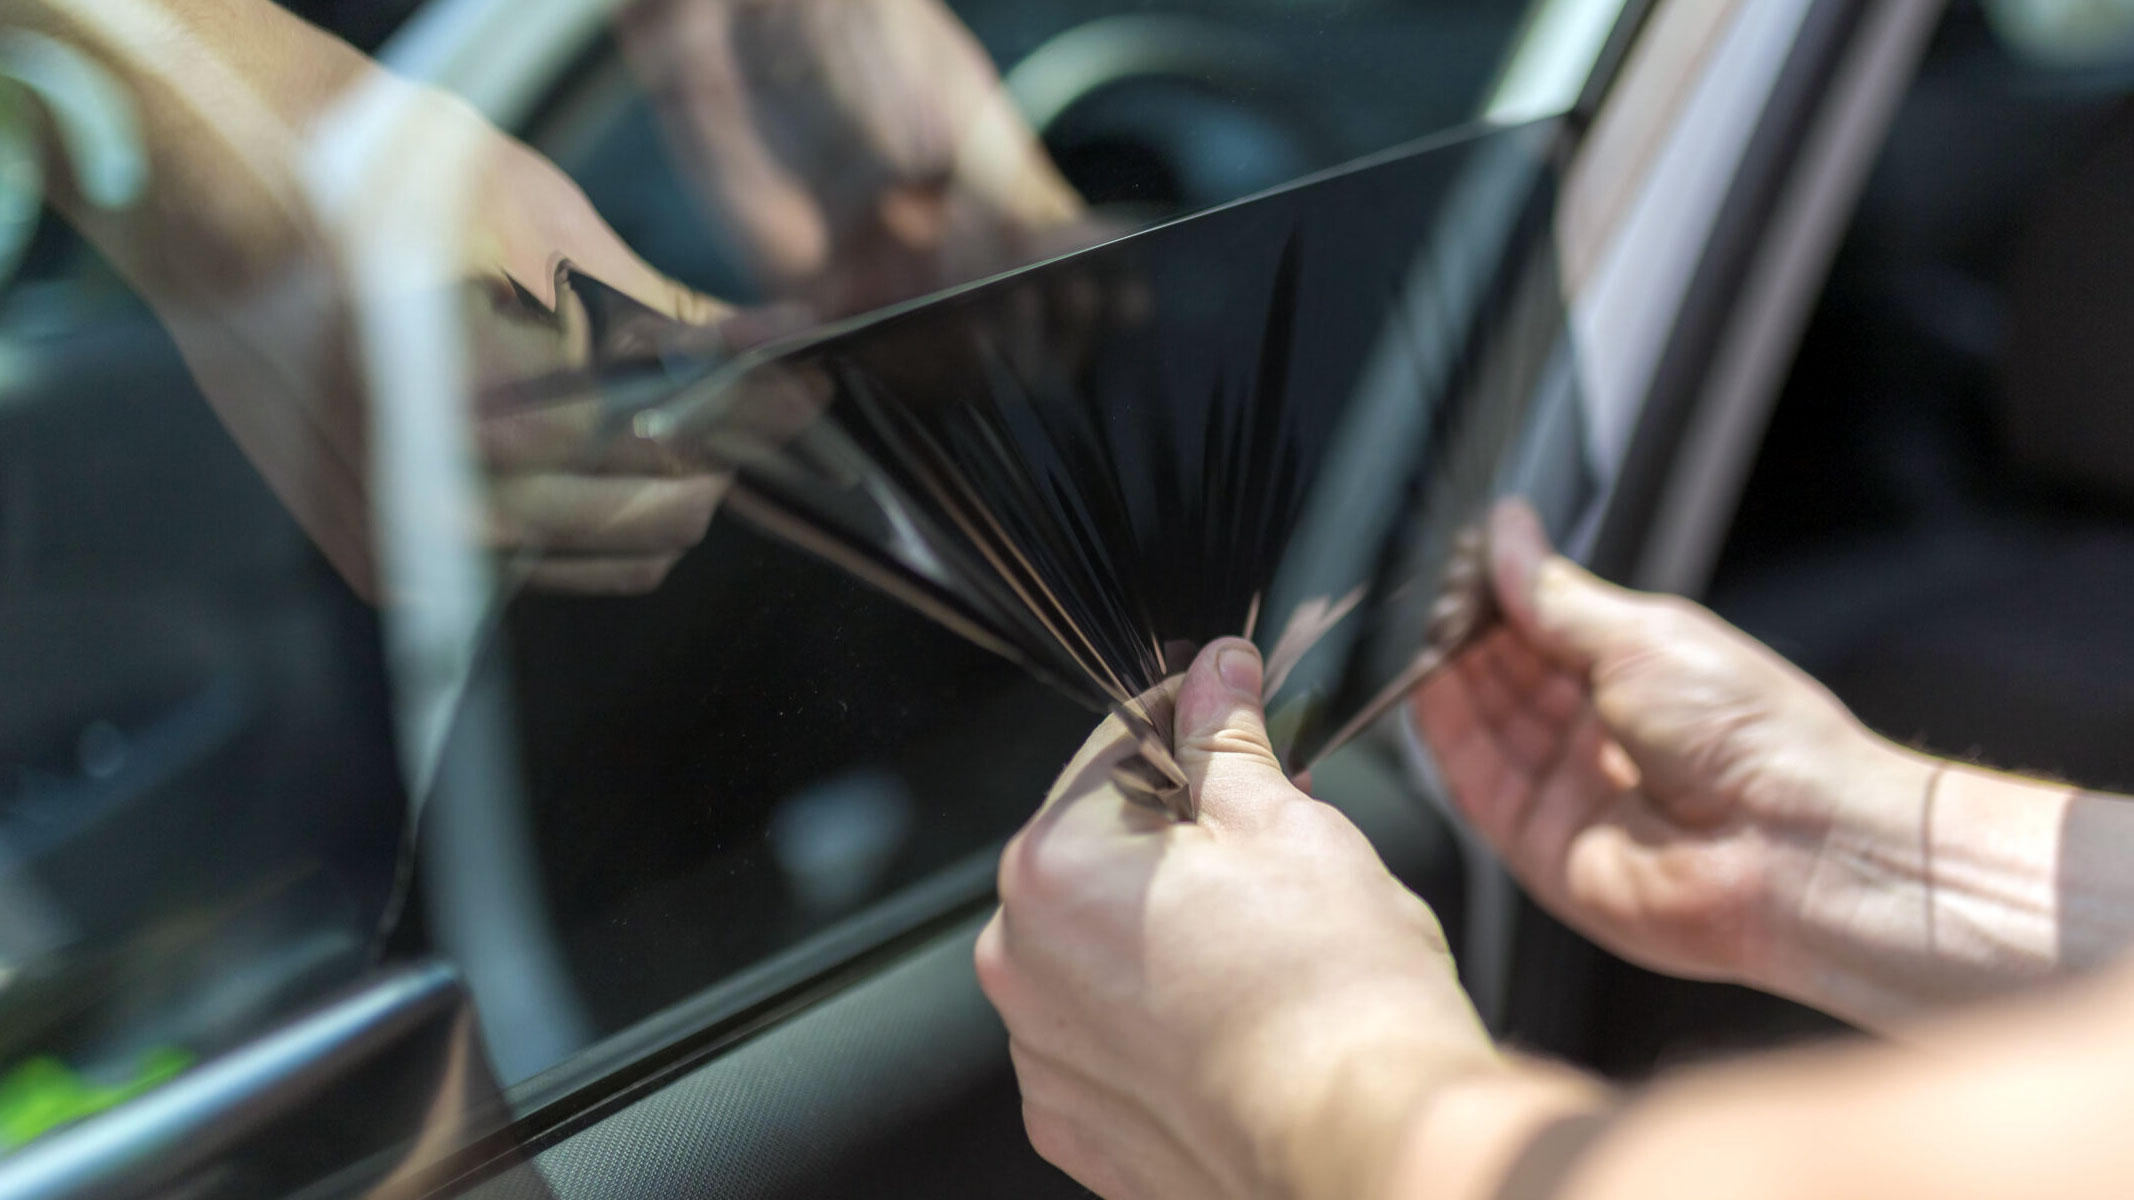 How to Remove Tint From Car Windows